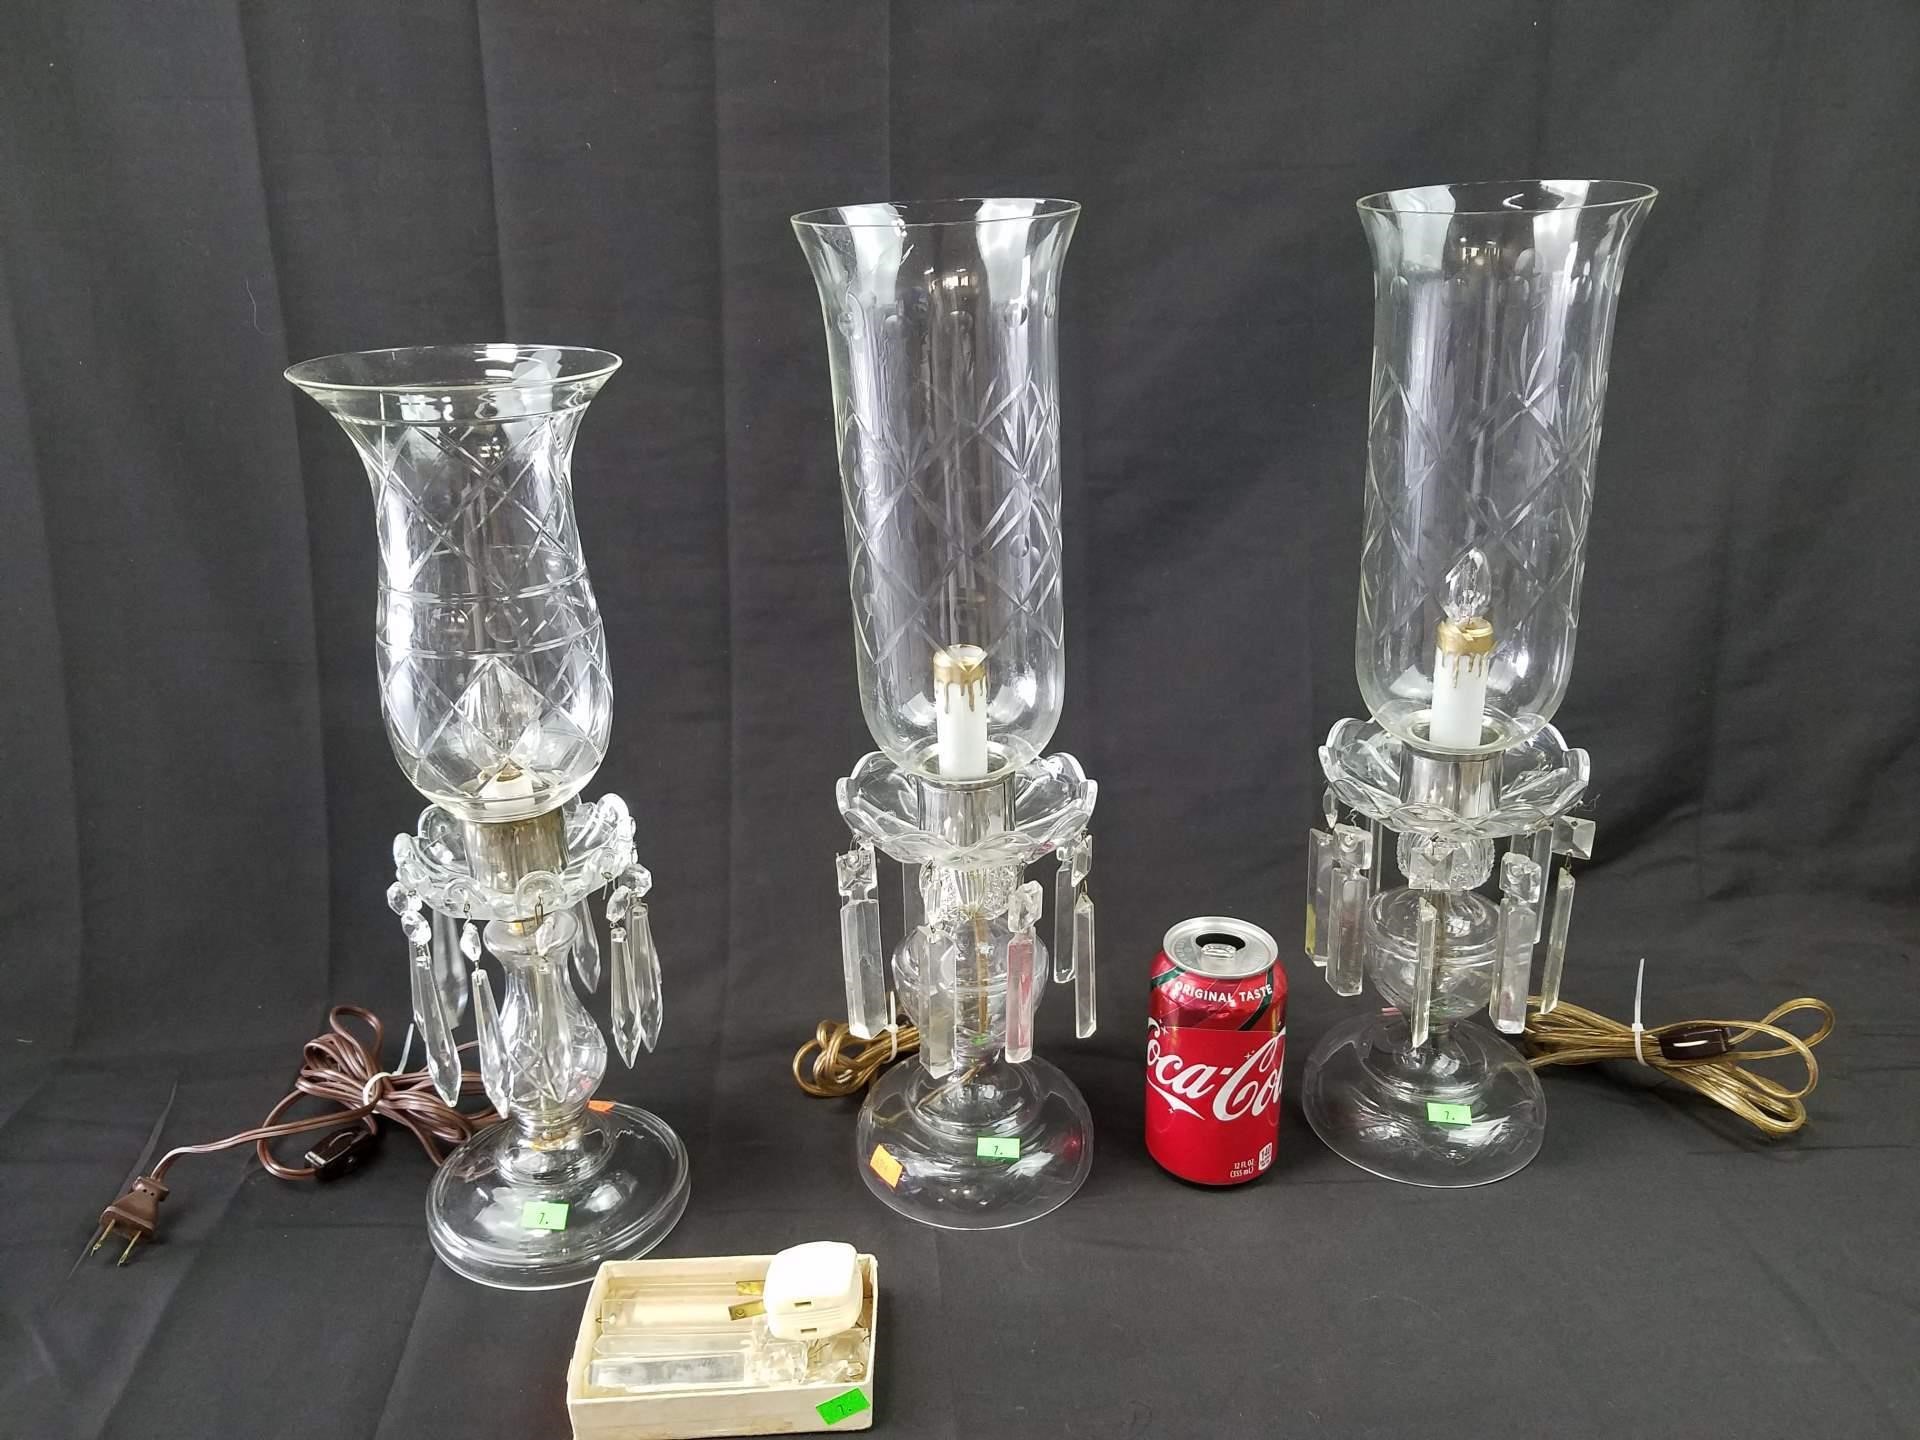 Baker & Overfield Consignment Auction